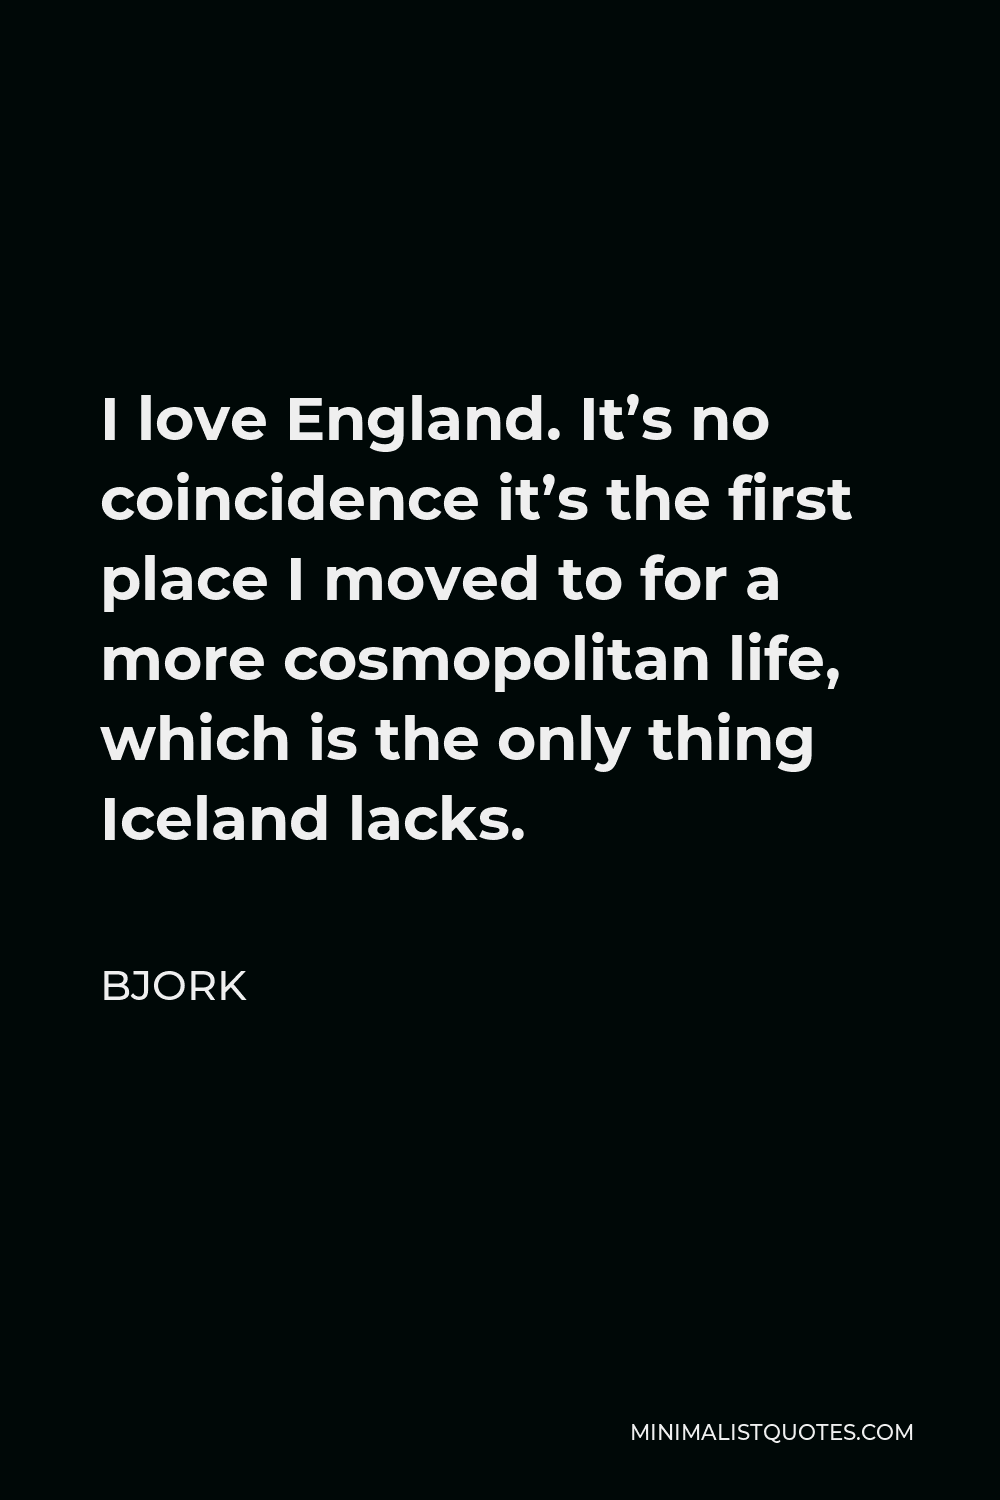 Bjork Quote - I love England. It’s no coincidence it’s the first place I moved to for a more cosmopolitan life, which is the only thing Iceland lacks.